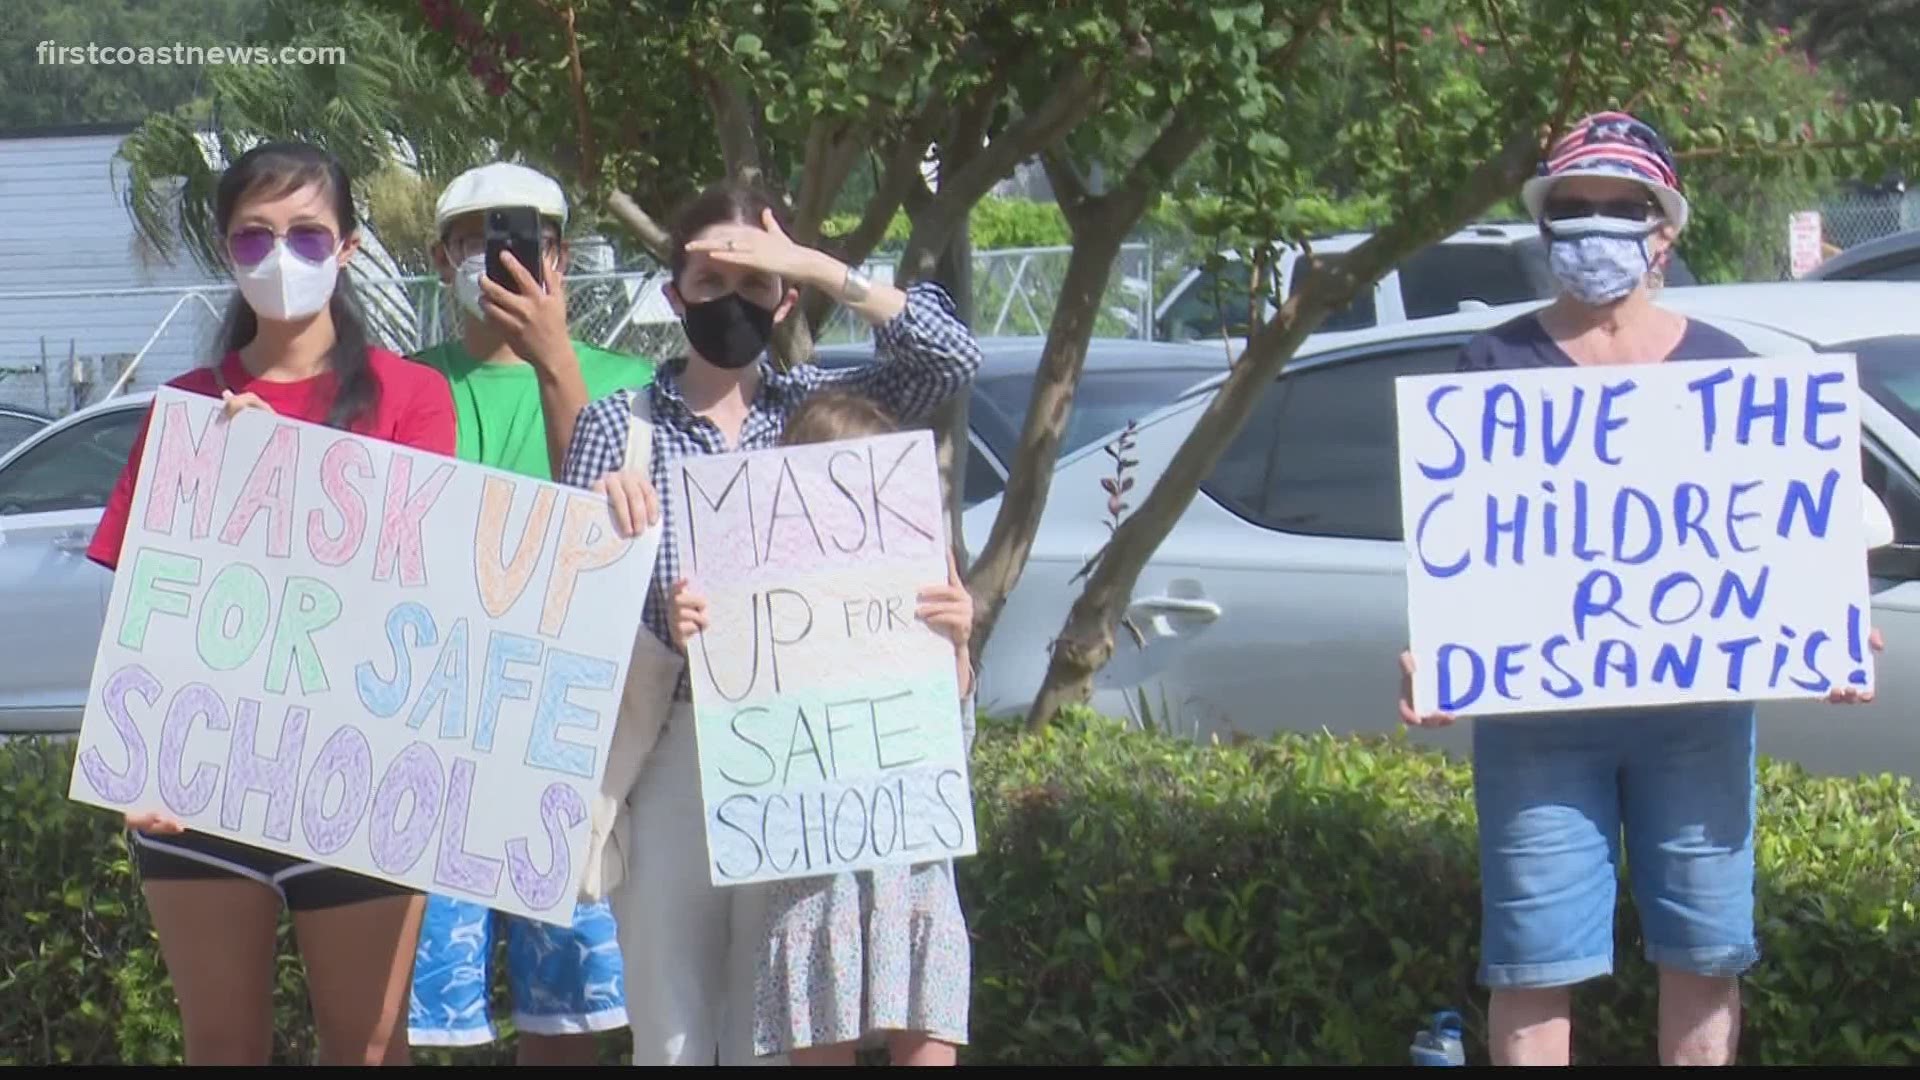 The community members held a rally Sunday evening and were met with counter-protestors.